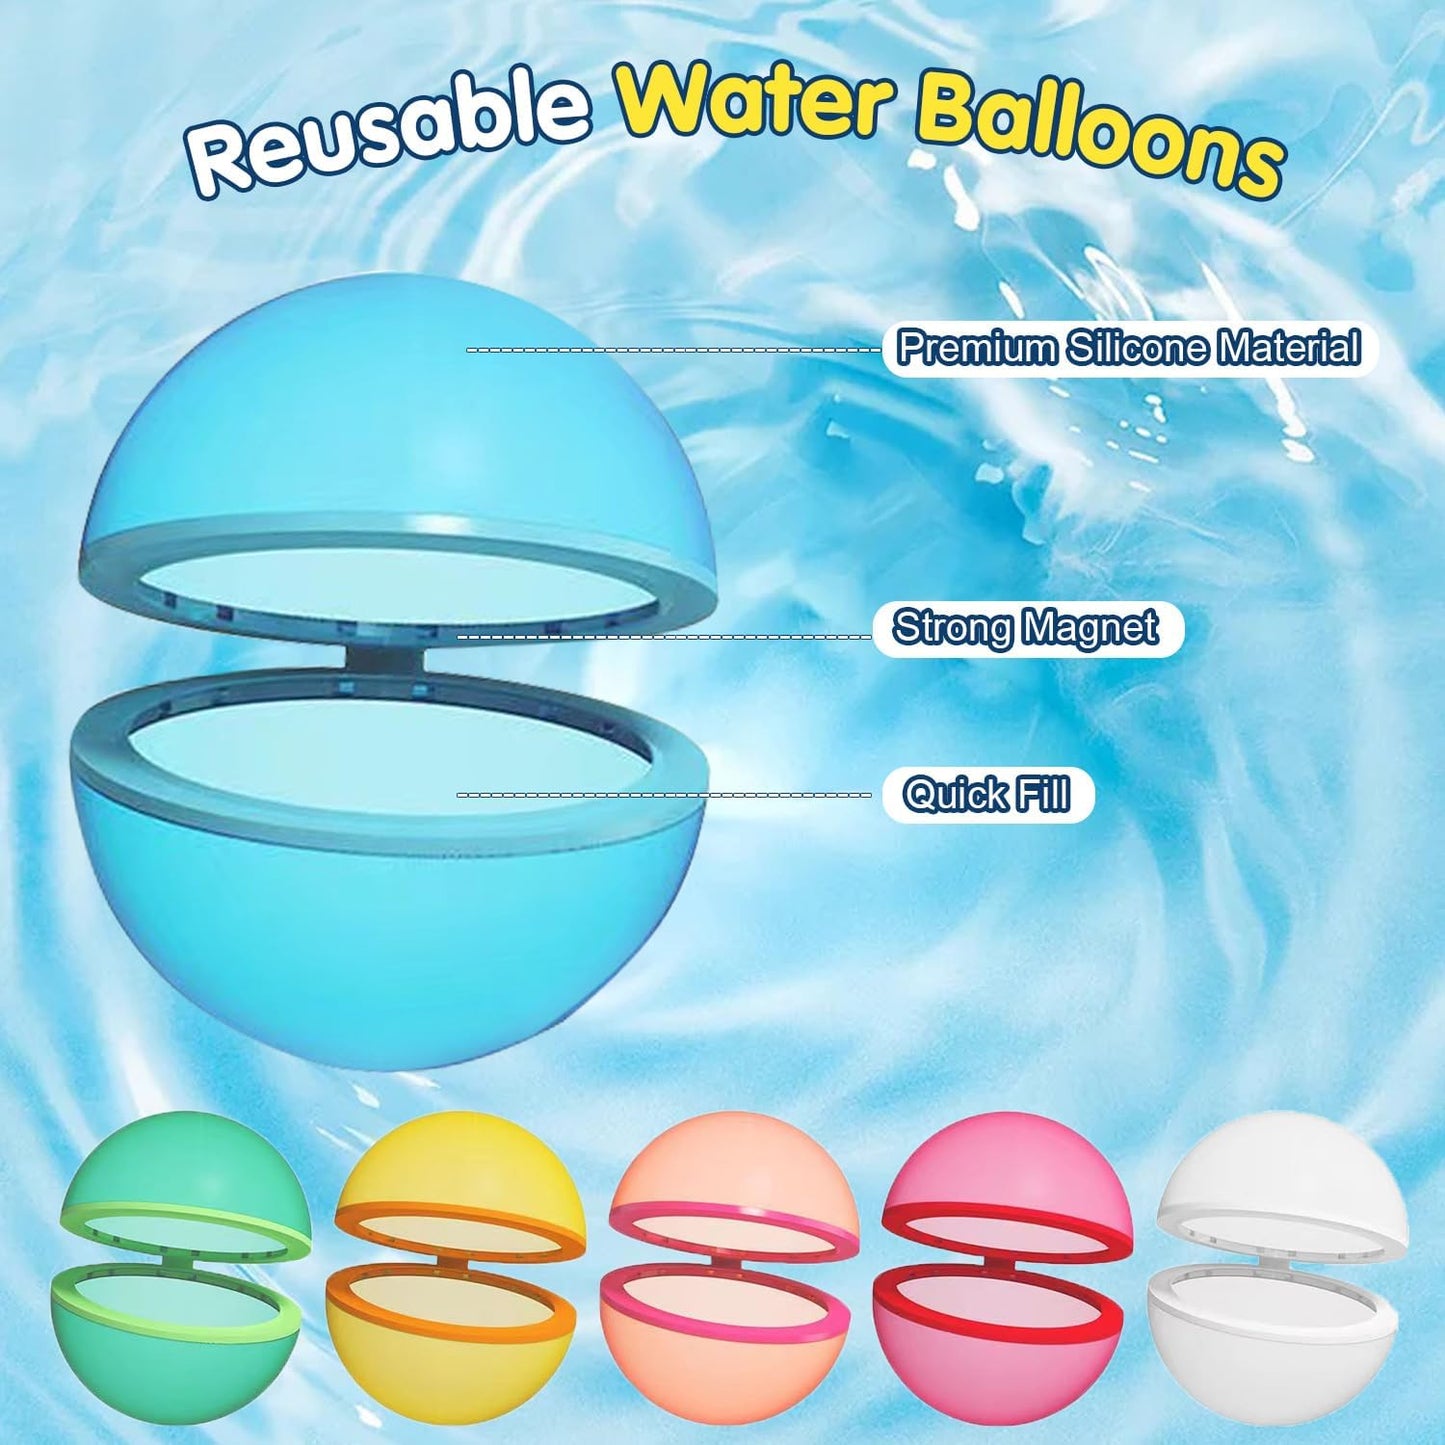 Reusable Water Balloons for Kids,24 PCS Magnetic Refillable Latex-Free Silicone Water Bomb with Mesh Bag, Summer Toys Beach Toys Swimming Pool Party Supplies Bath Toy Outdoor Idea Gift for Kids